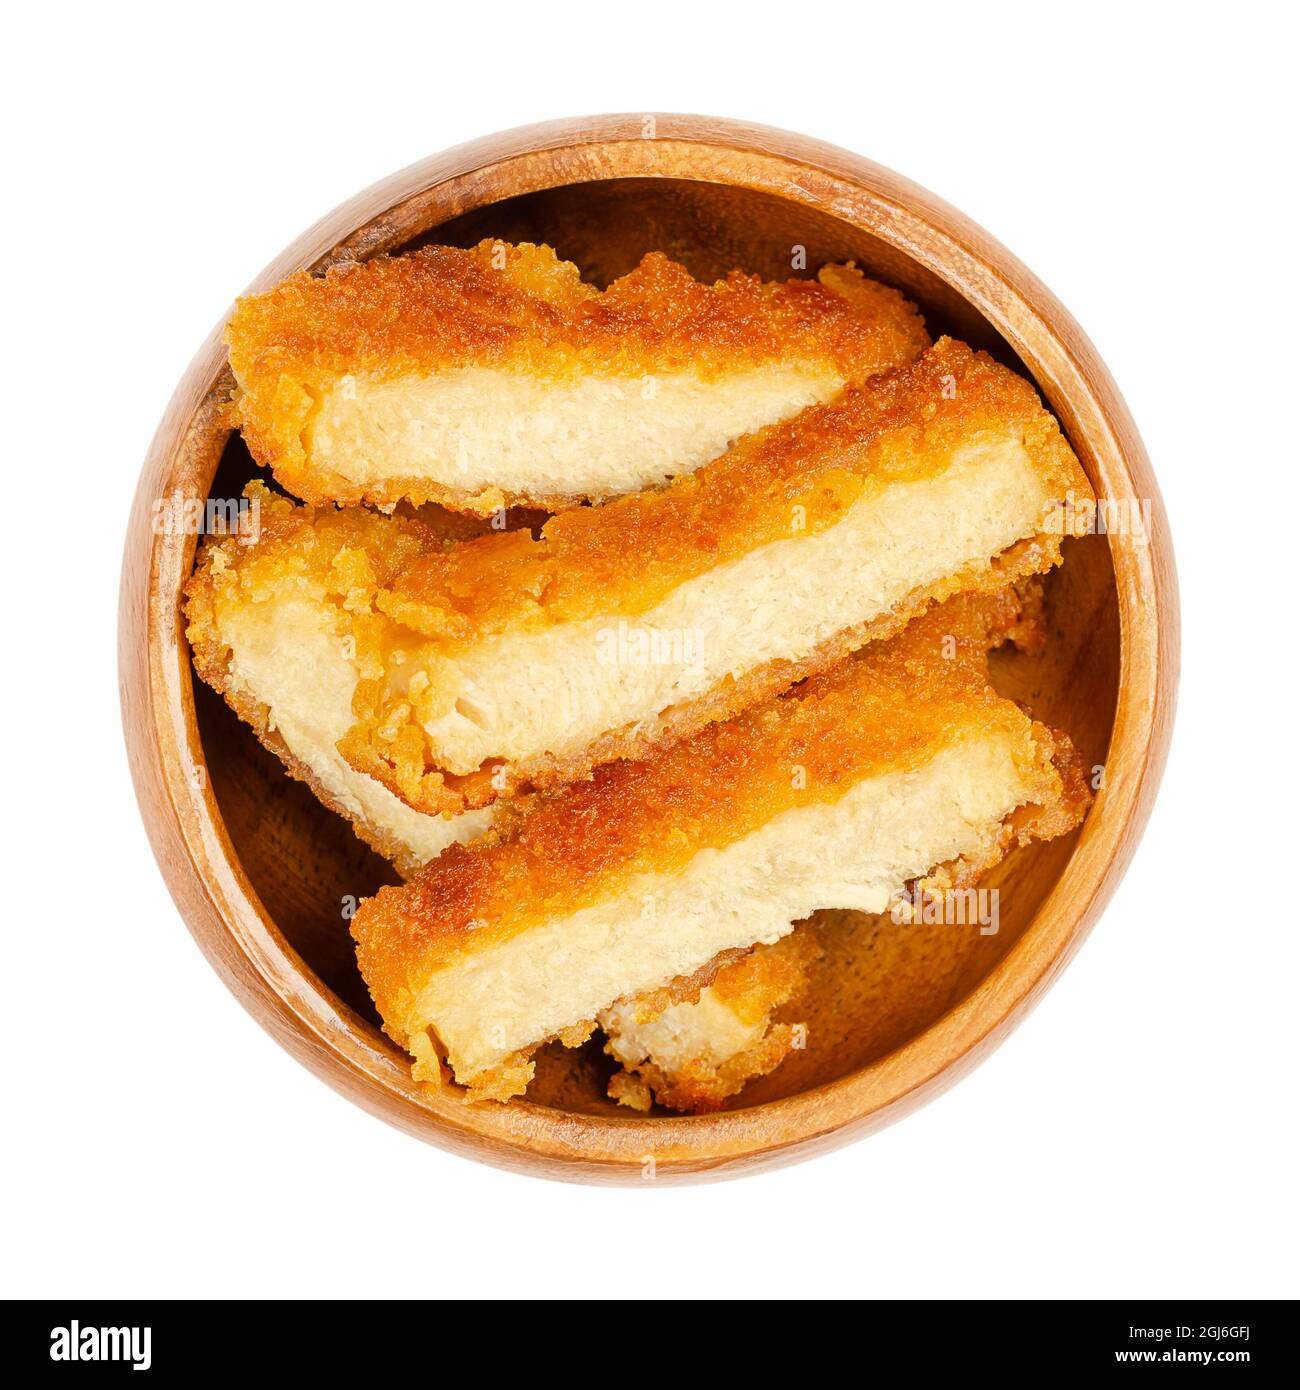 Deep-fried vegan schnitzel slices, in a wooden bowl. Fried cutlets, based on soy protein, a meat substitute, with crispy breading, cut into slices. Stock Photo